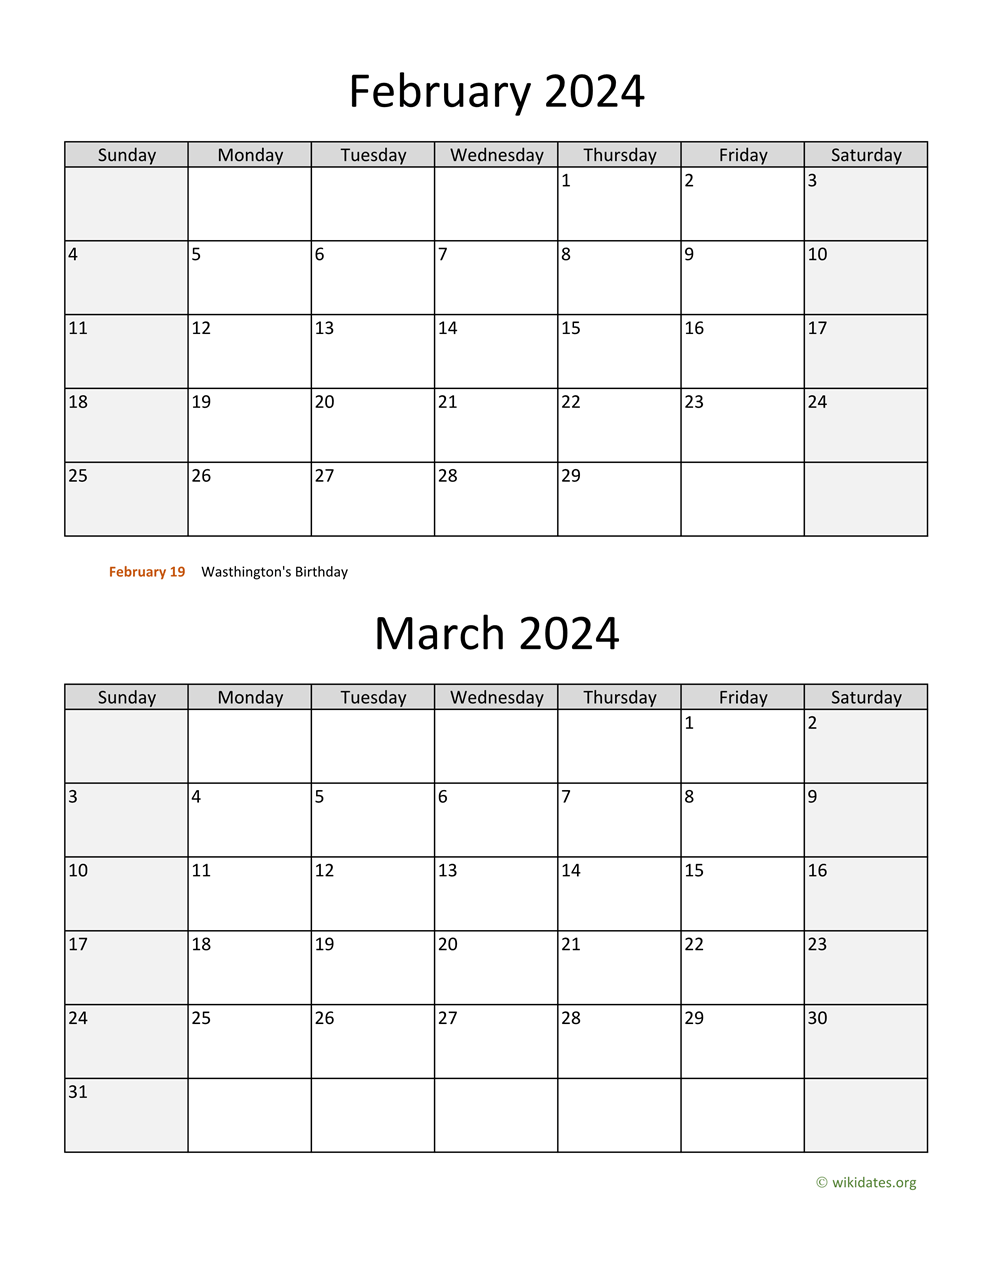 February And March 2024 Calendar | Wikidates for February March April 2024 Calendar Printable